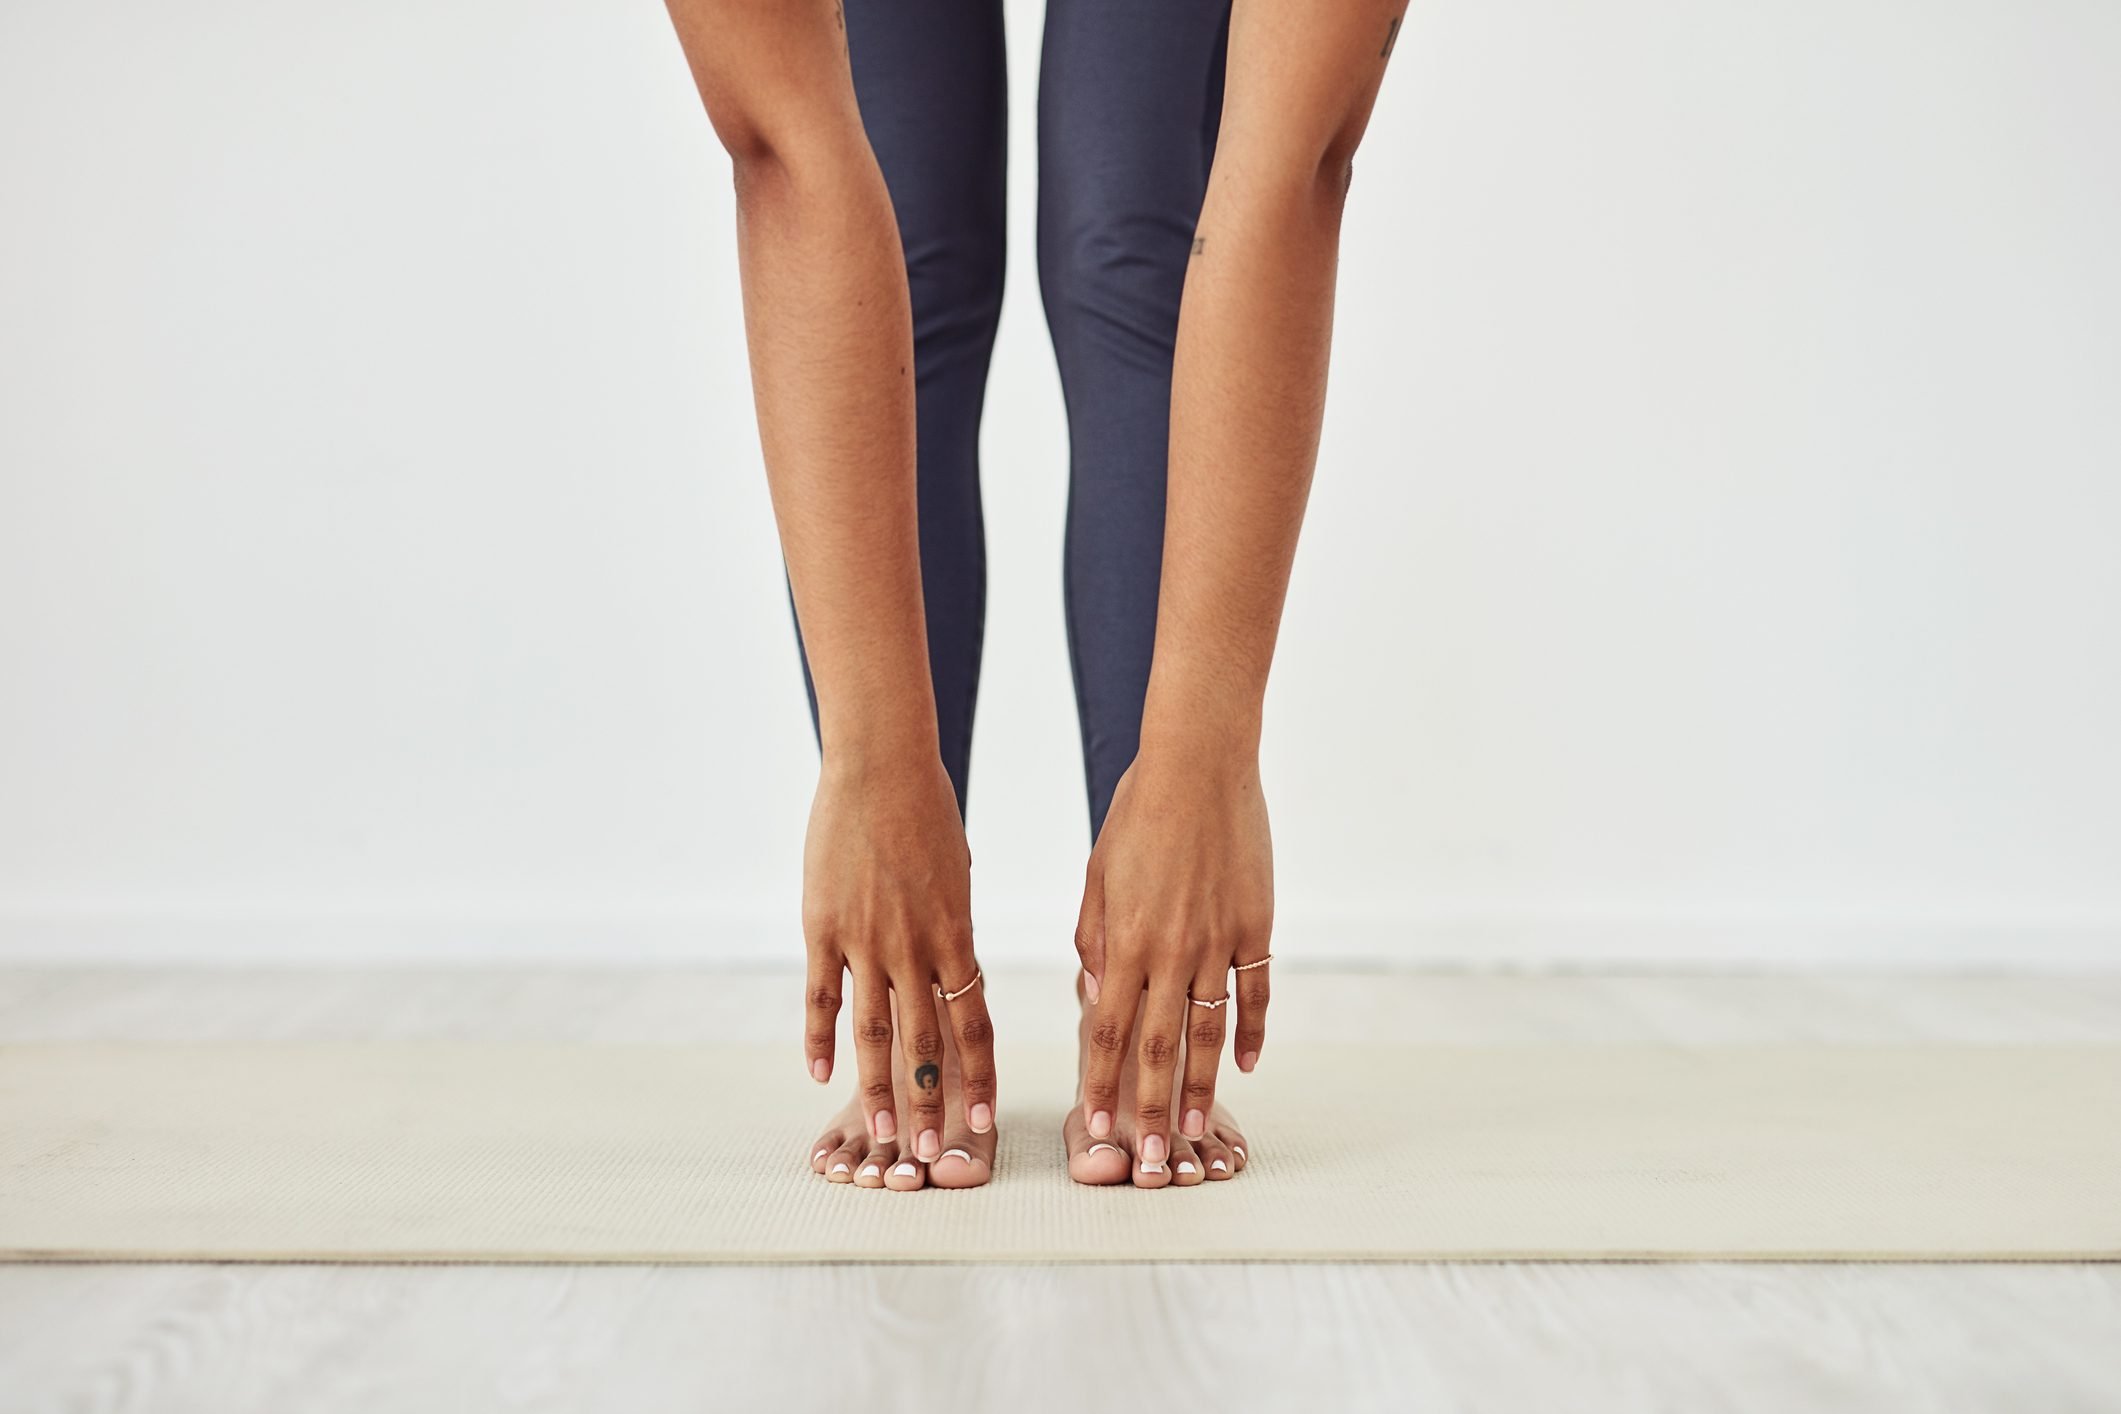 The Types of Stretching Fitness Experts Recommend—and One They Avoid